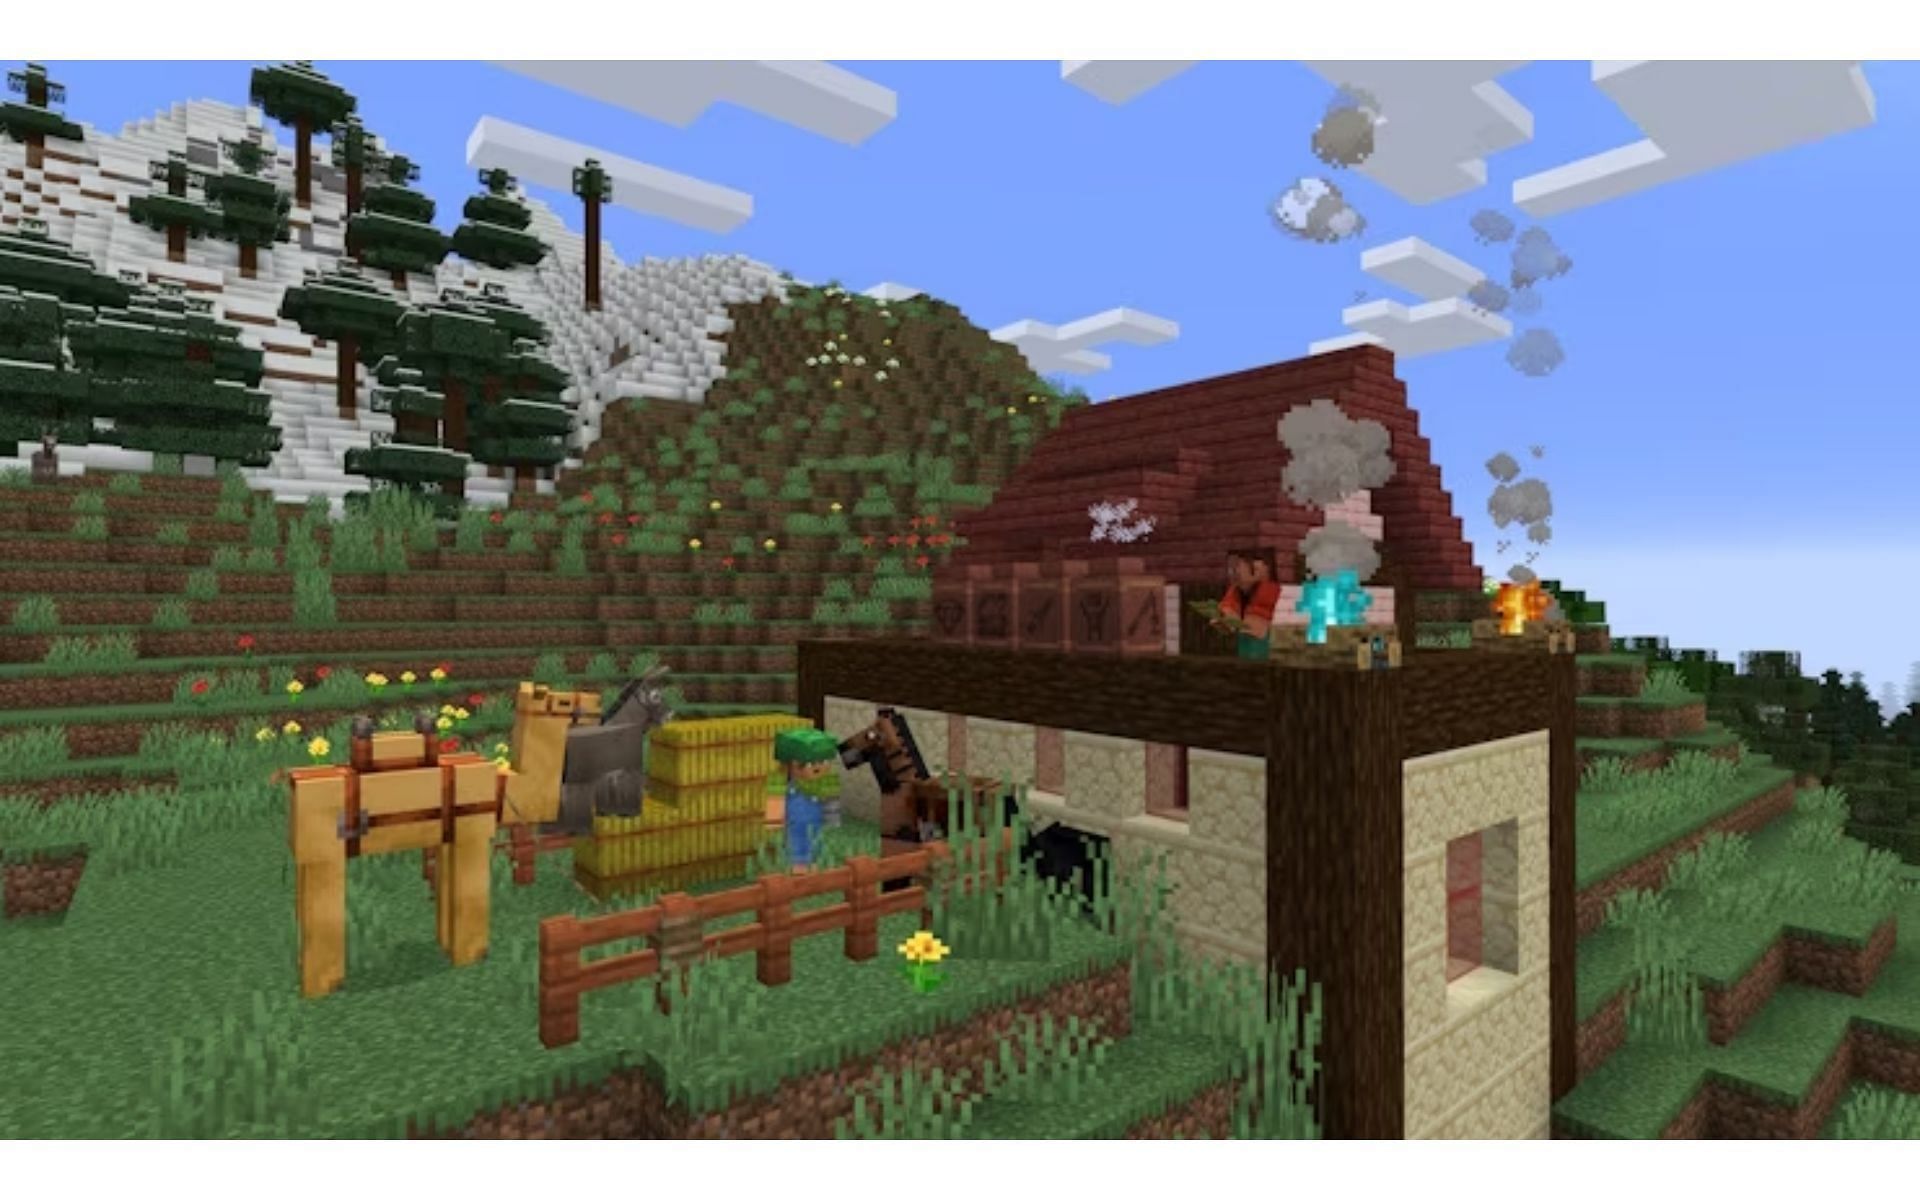 Many improvements have been made with the latest update. (Image via Mojang)